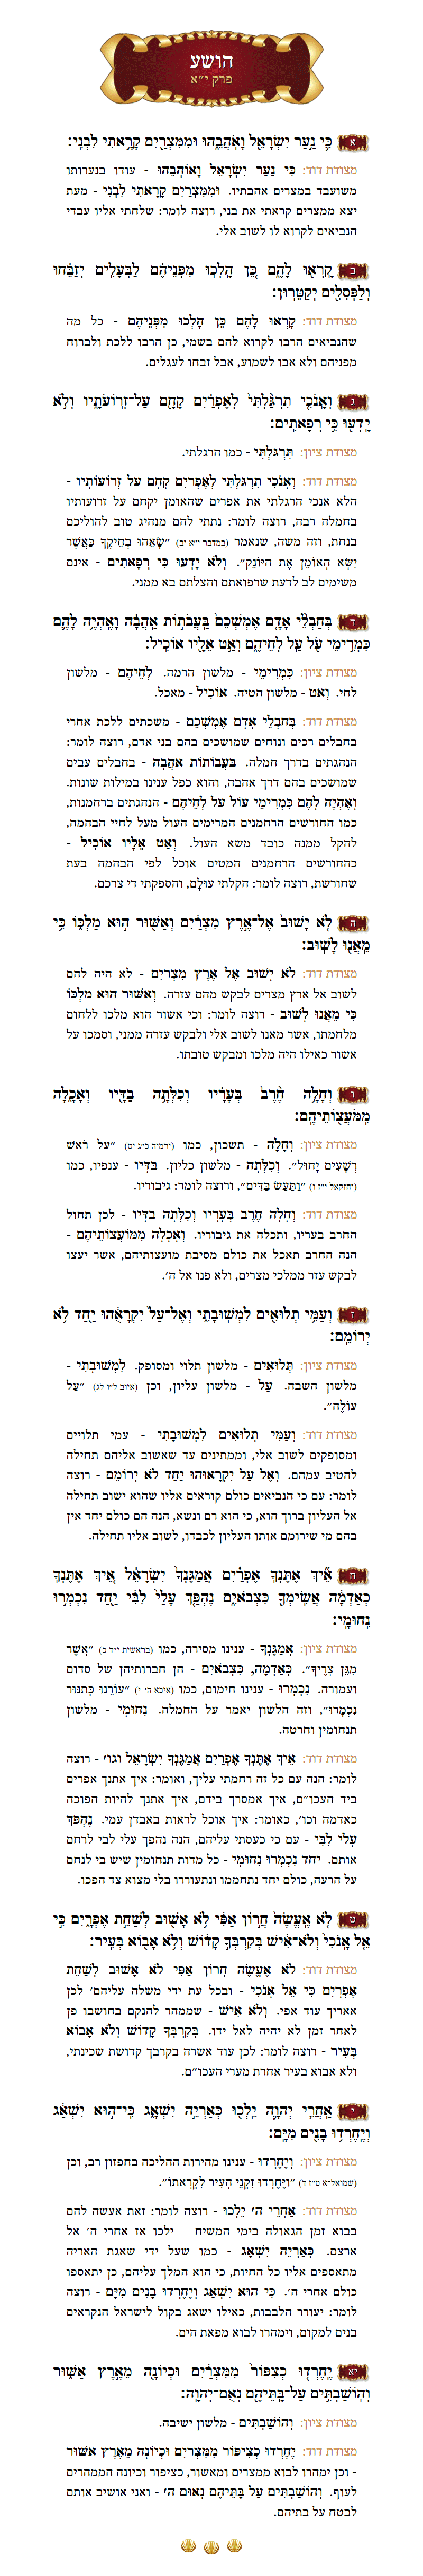 Sefer Hoshea Chapter 11 with commentary